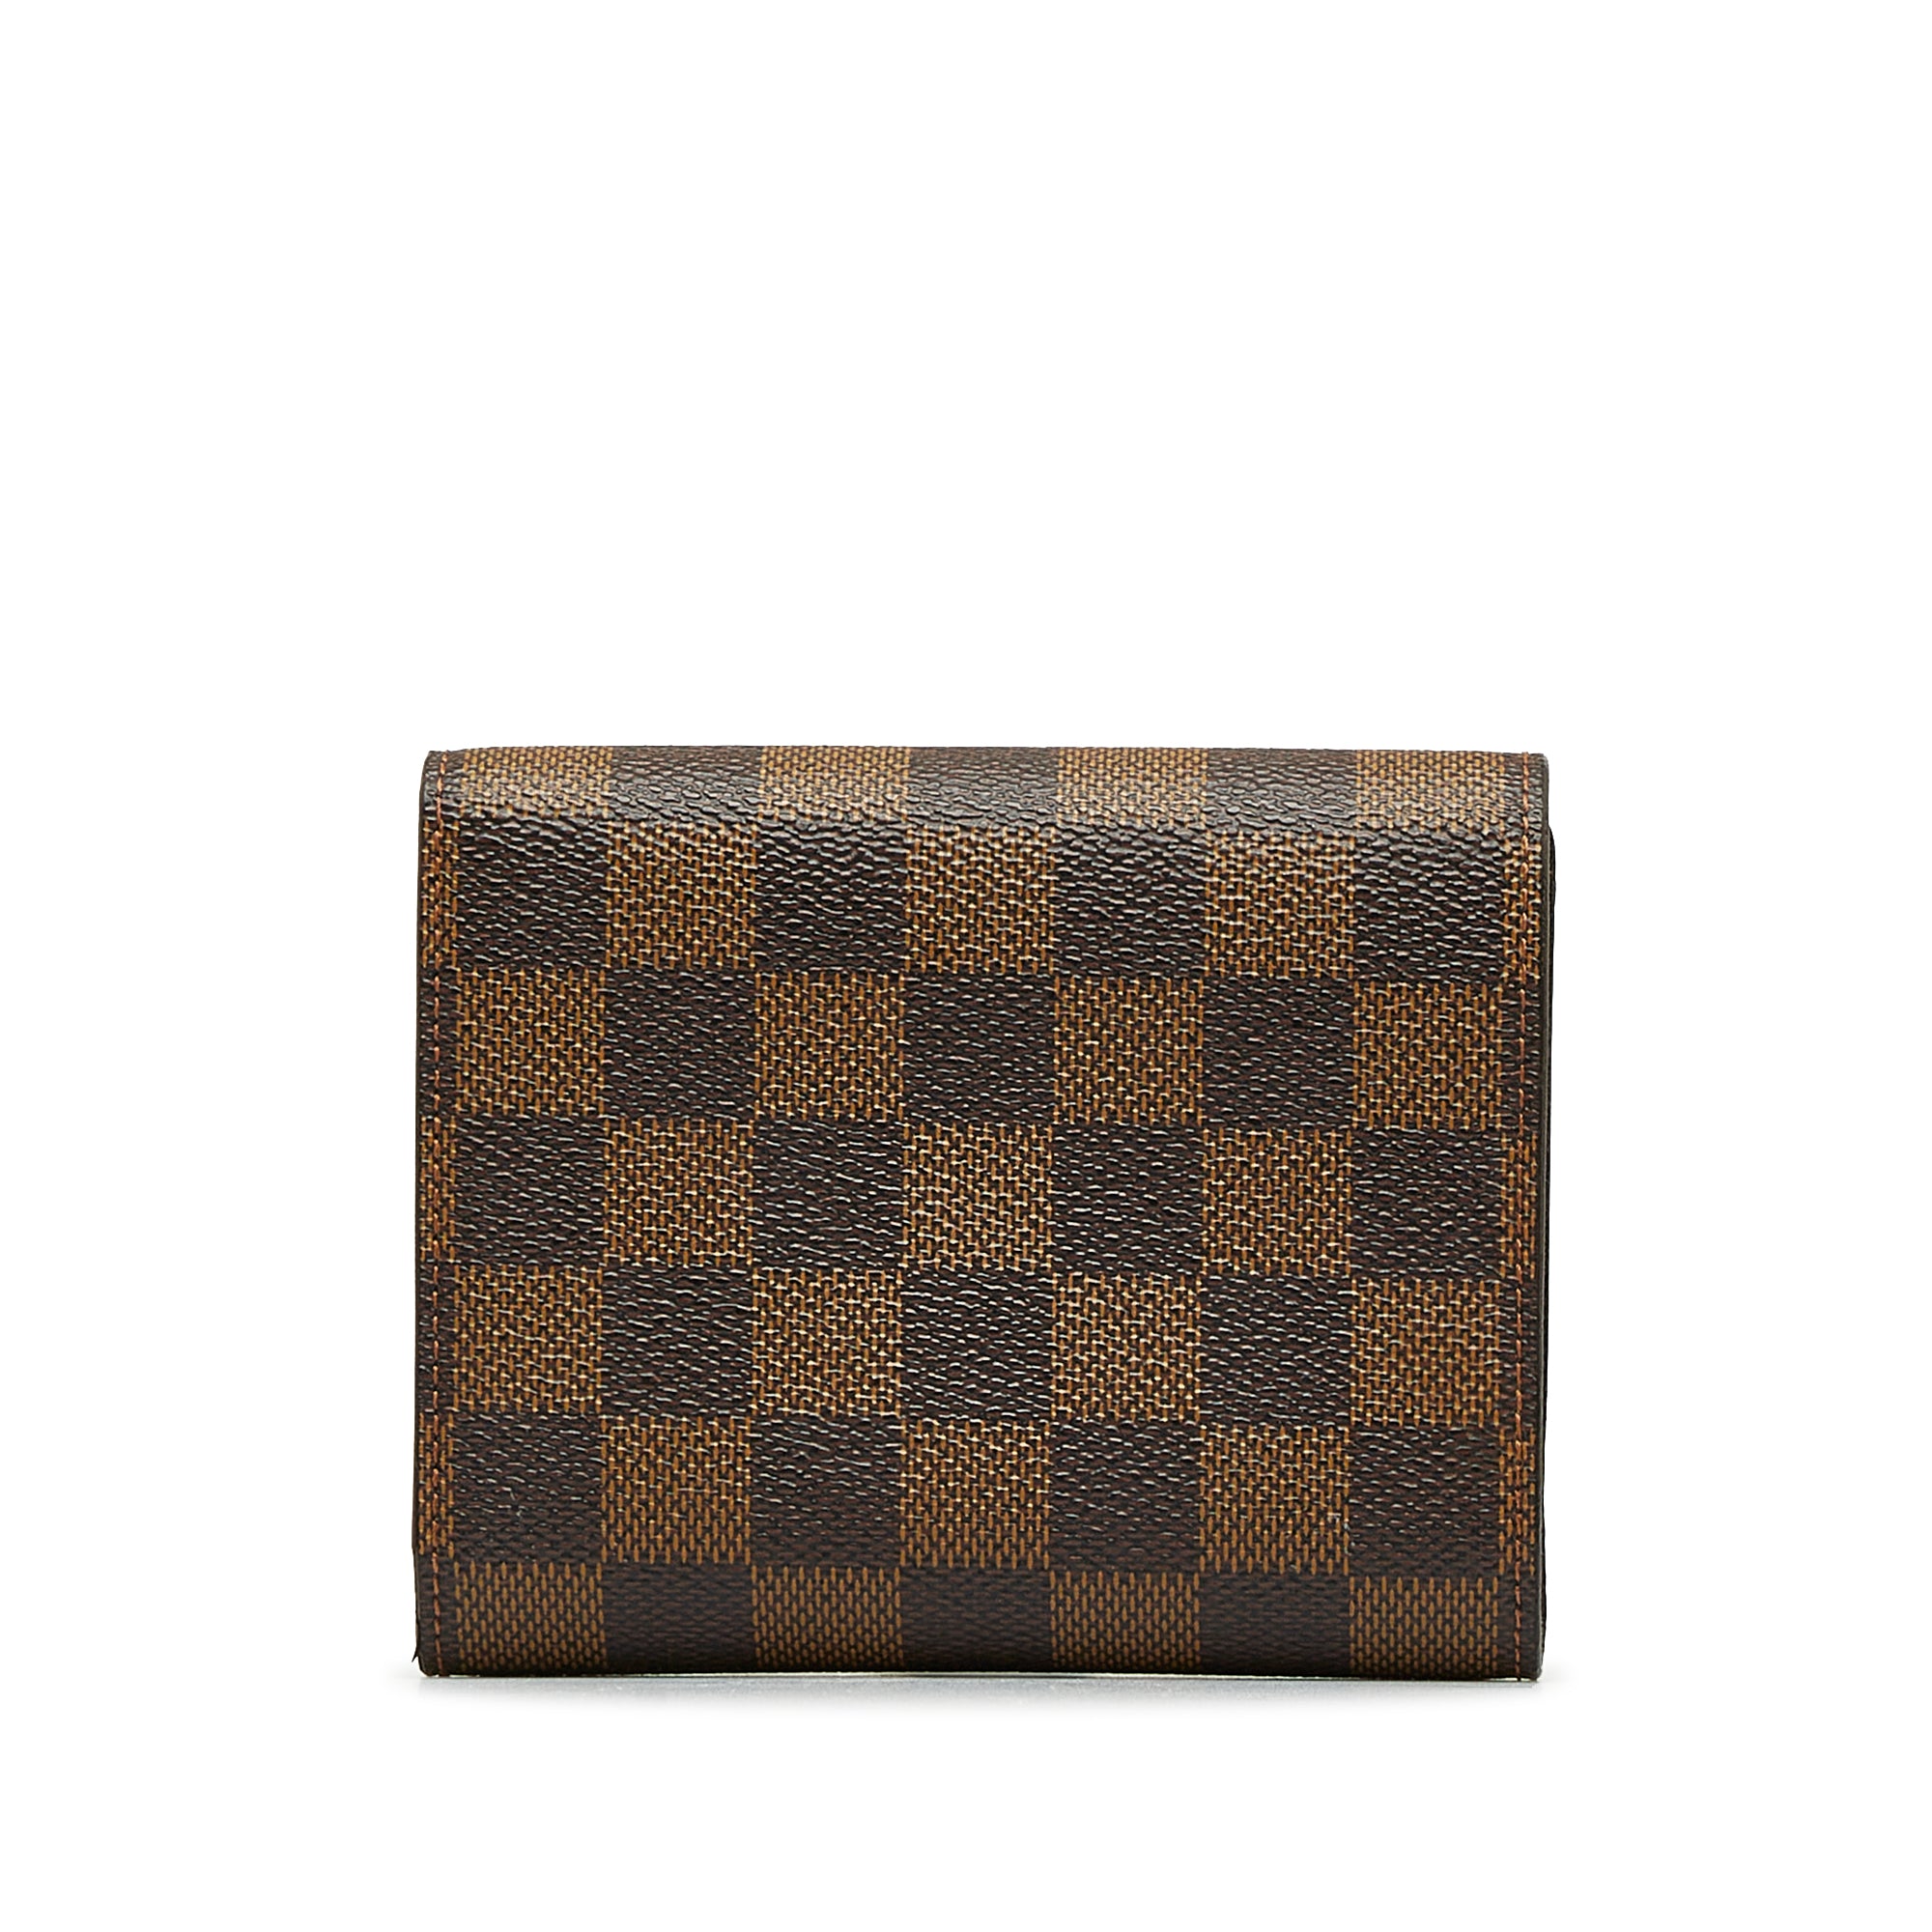 Louis Vuitton Joey Small leather goods 366491